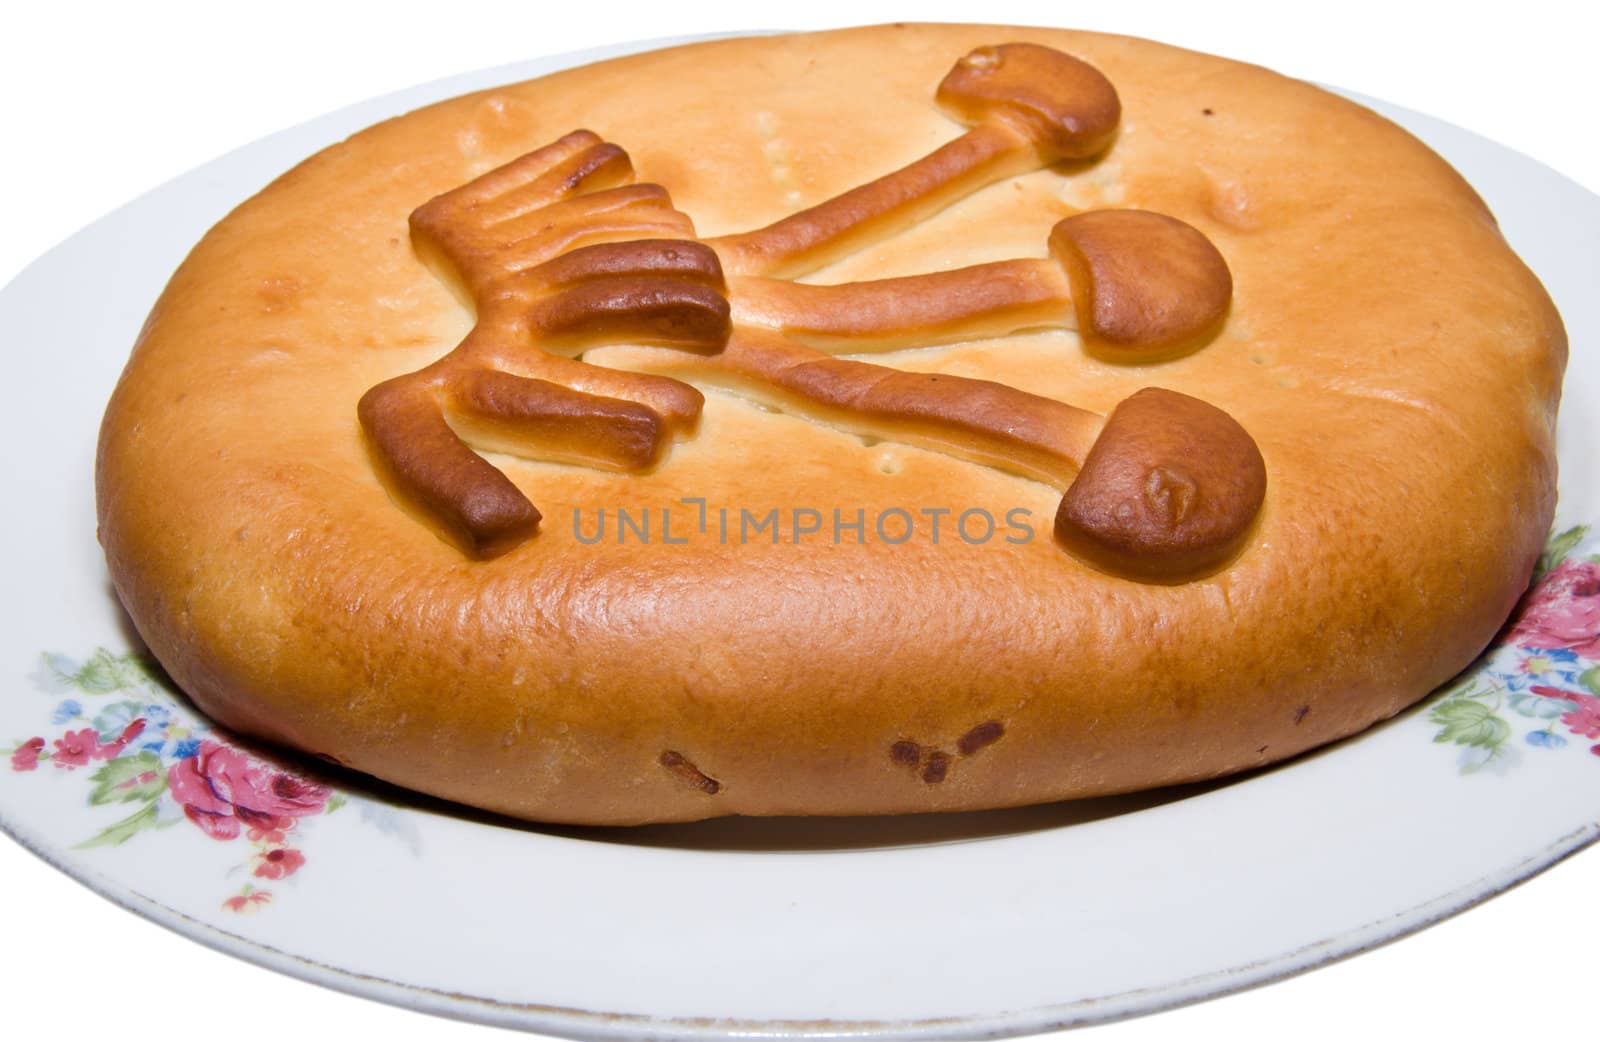 The celebratory pie lays on a plate, isolated on a white background.